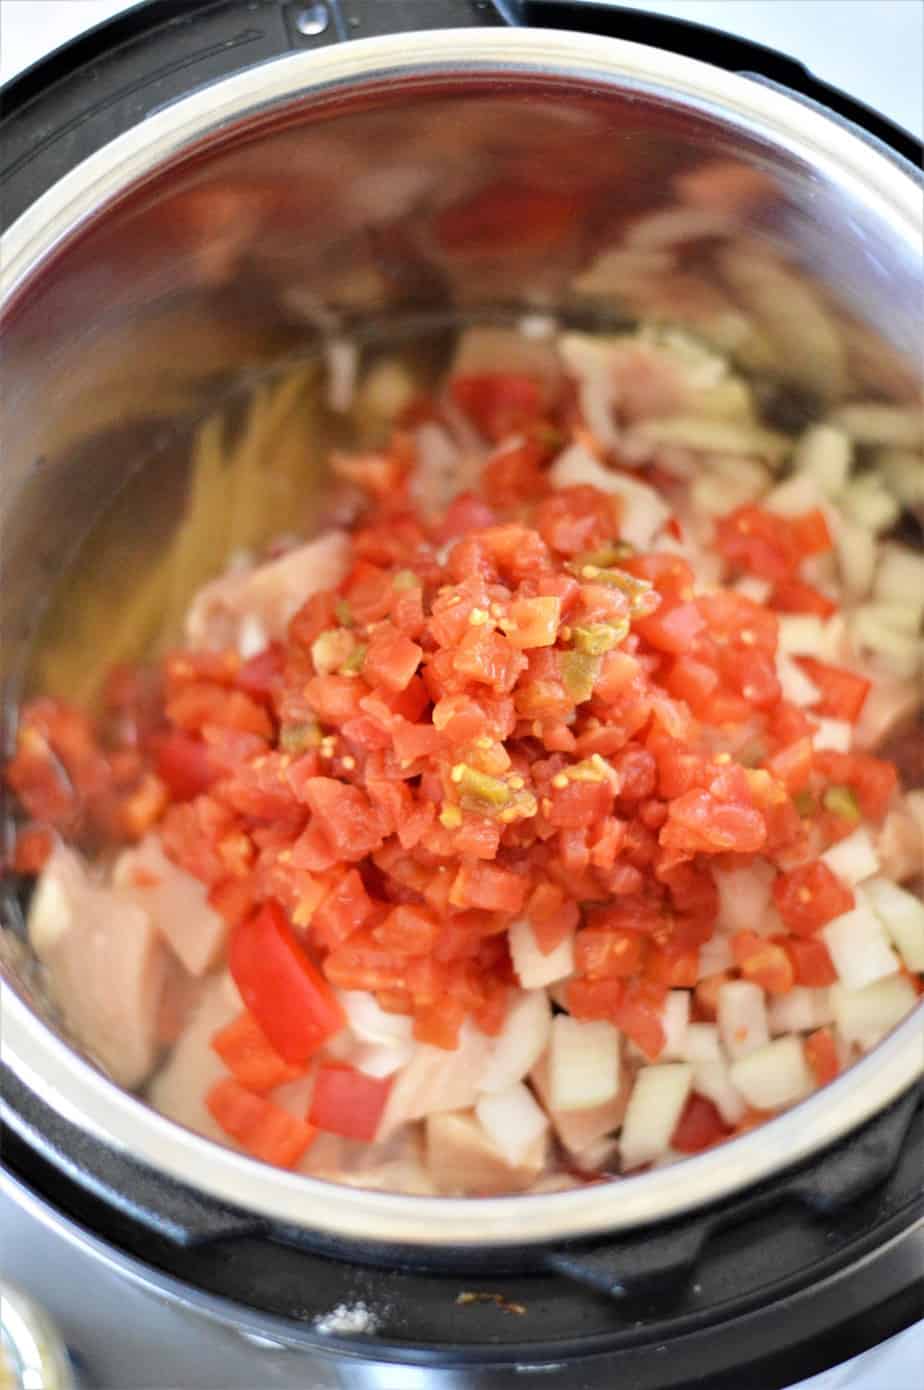 diced tomatoes with green chilis added to instant pot with chicken spaghetti ingredients